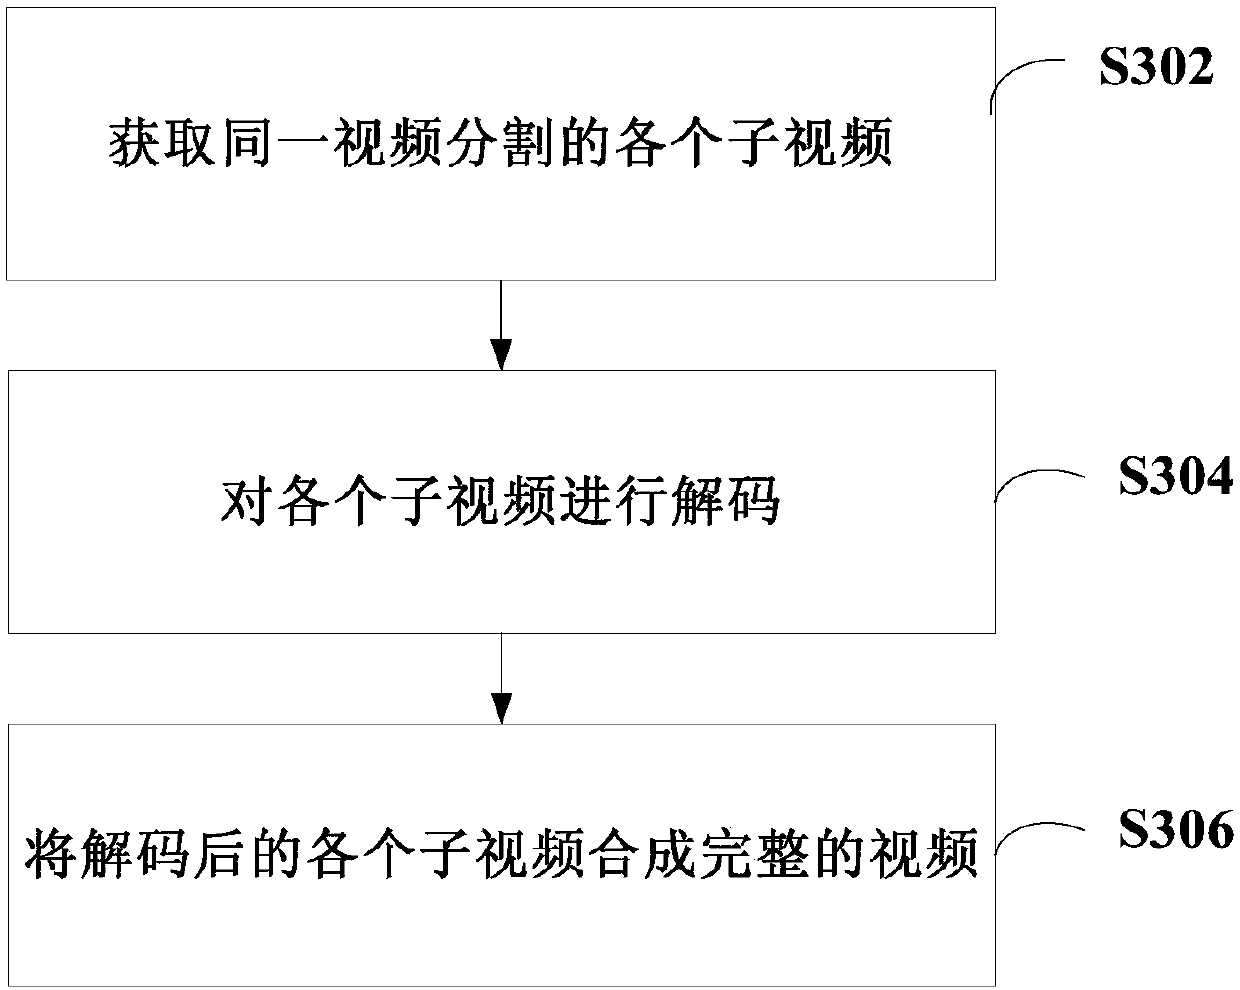 Video encoding method, video restoration method, video playing system and related devices